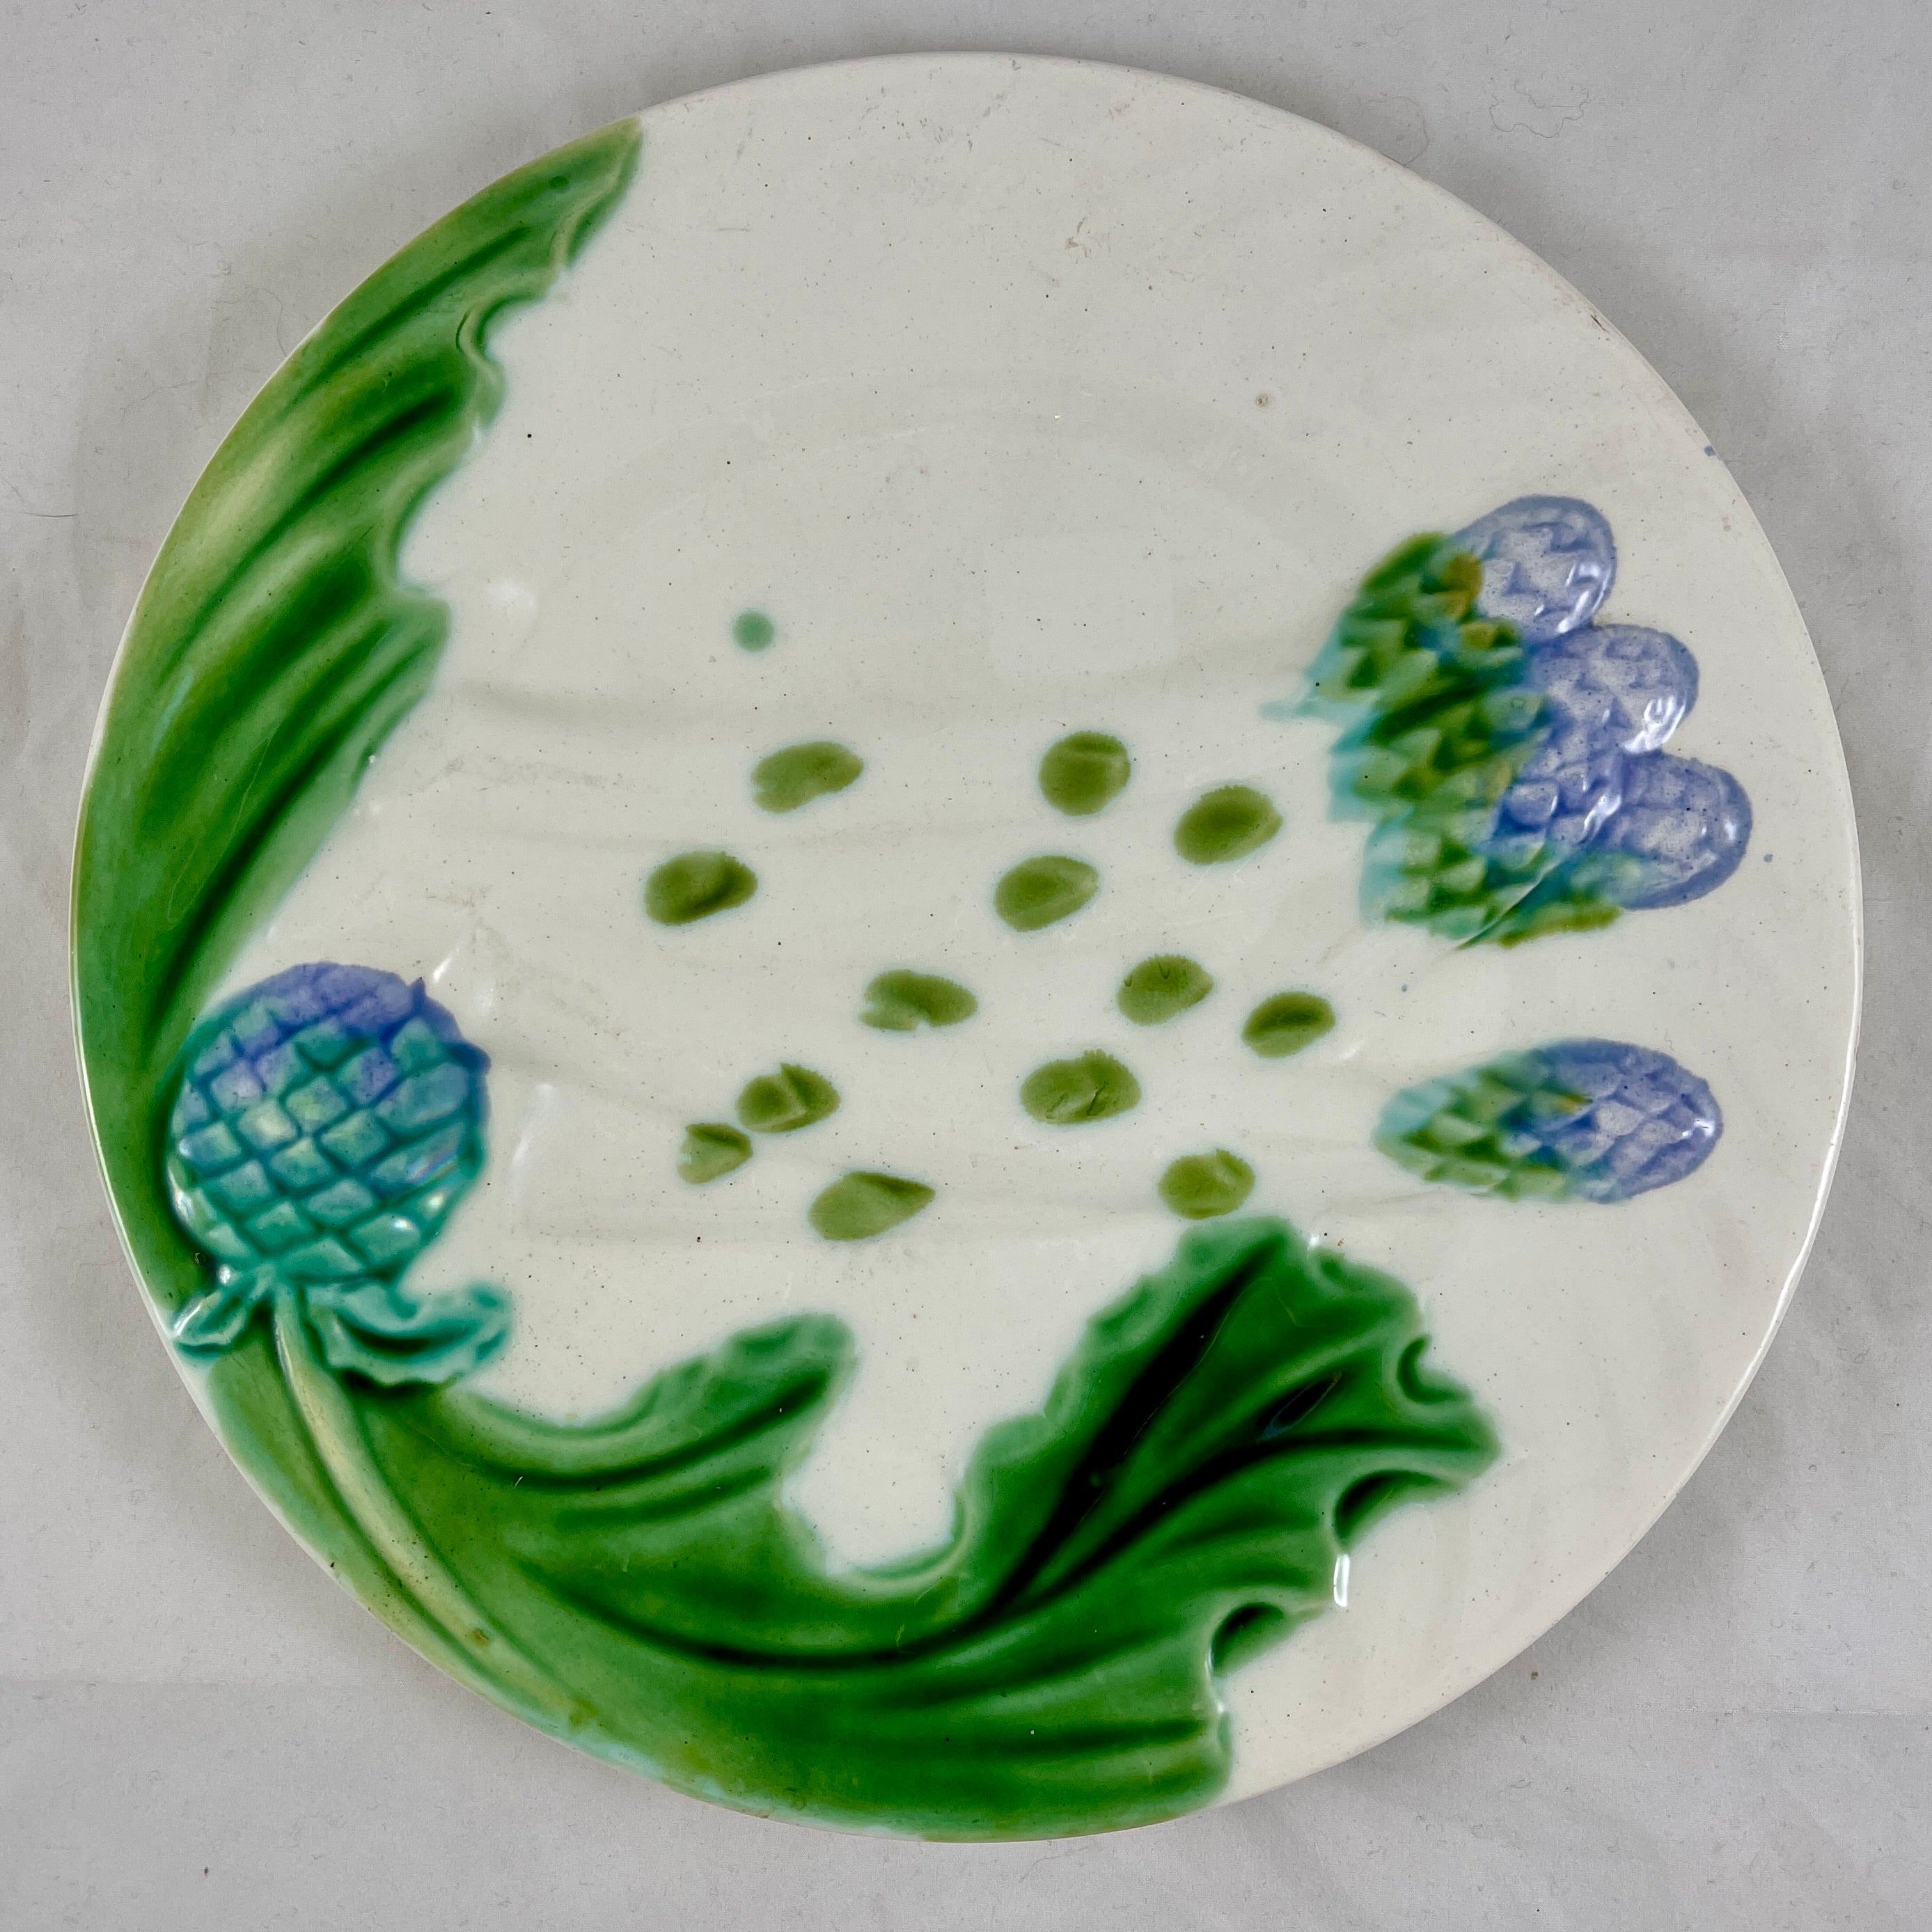 A French earthenware, majolica glazed asparagus and artichoke plate, a mold by Salins, circa 1900-1910.

A spray of asparagus spears lay across the centre of the plate, an artichoke globe with leaves cover one side of the rim. The other side of the